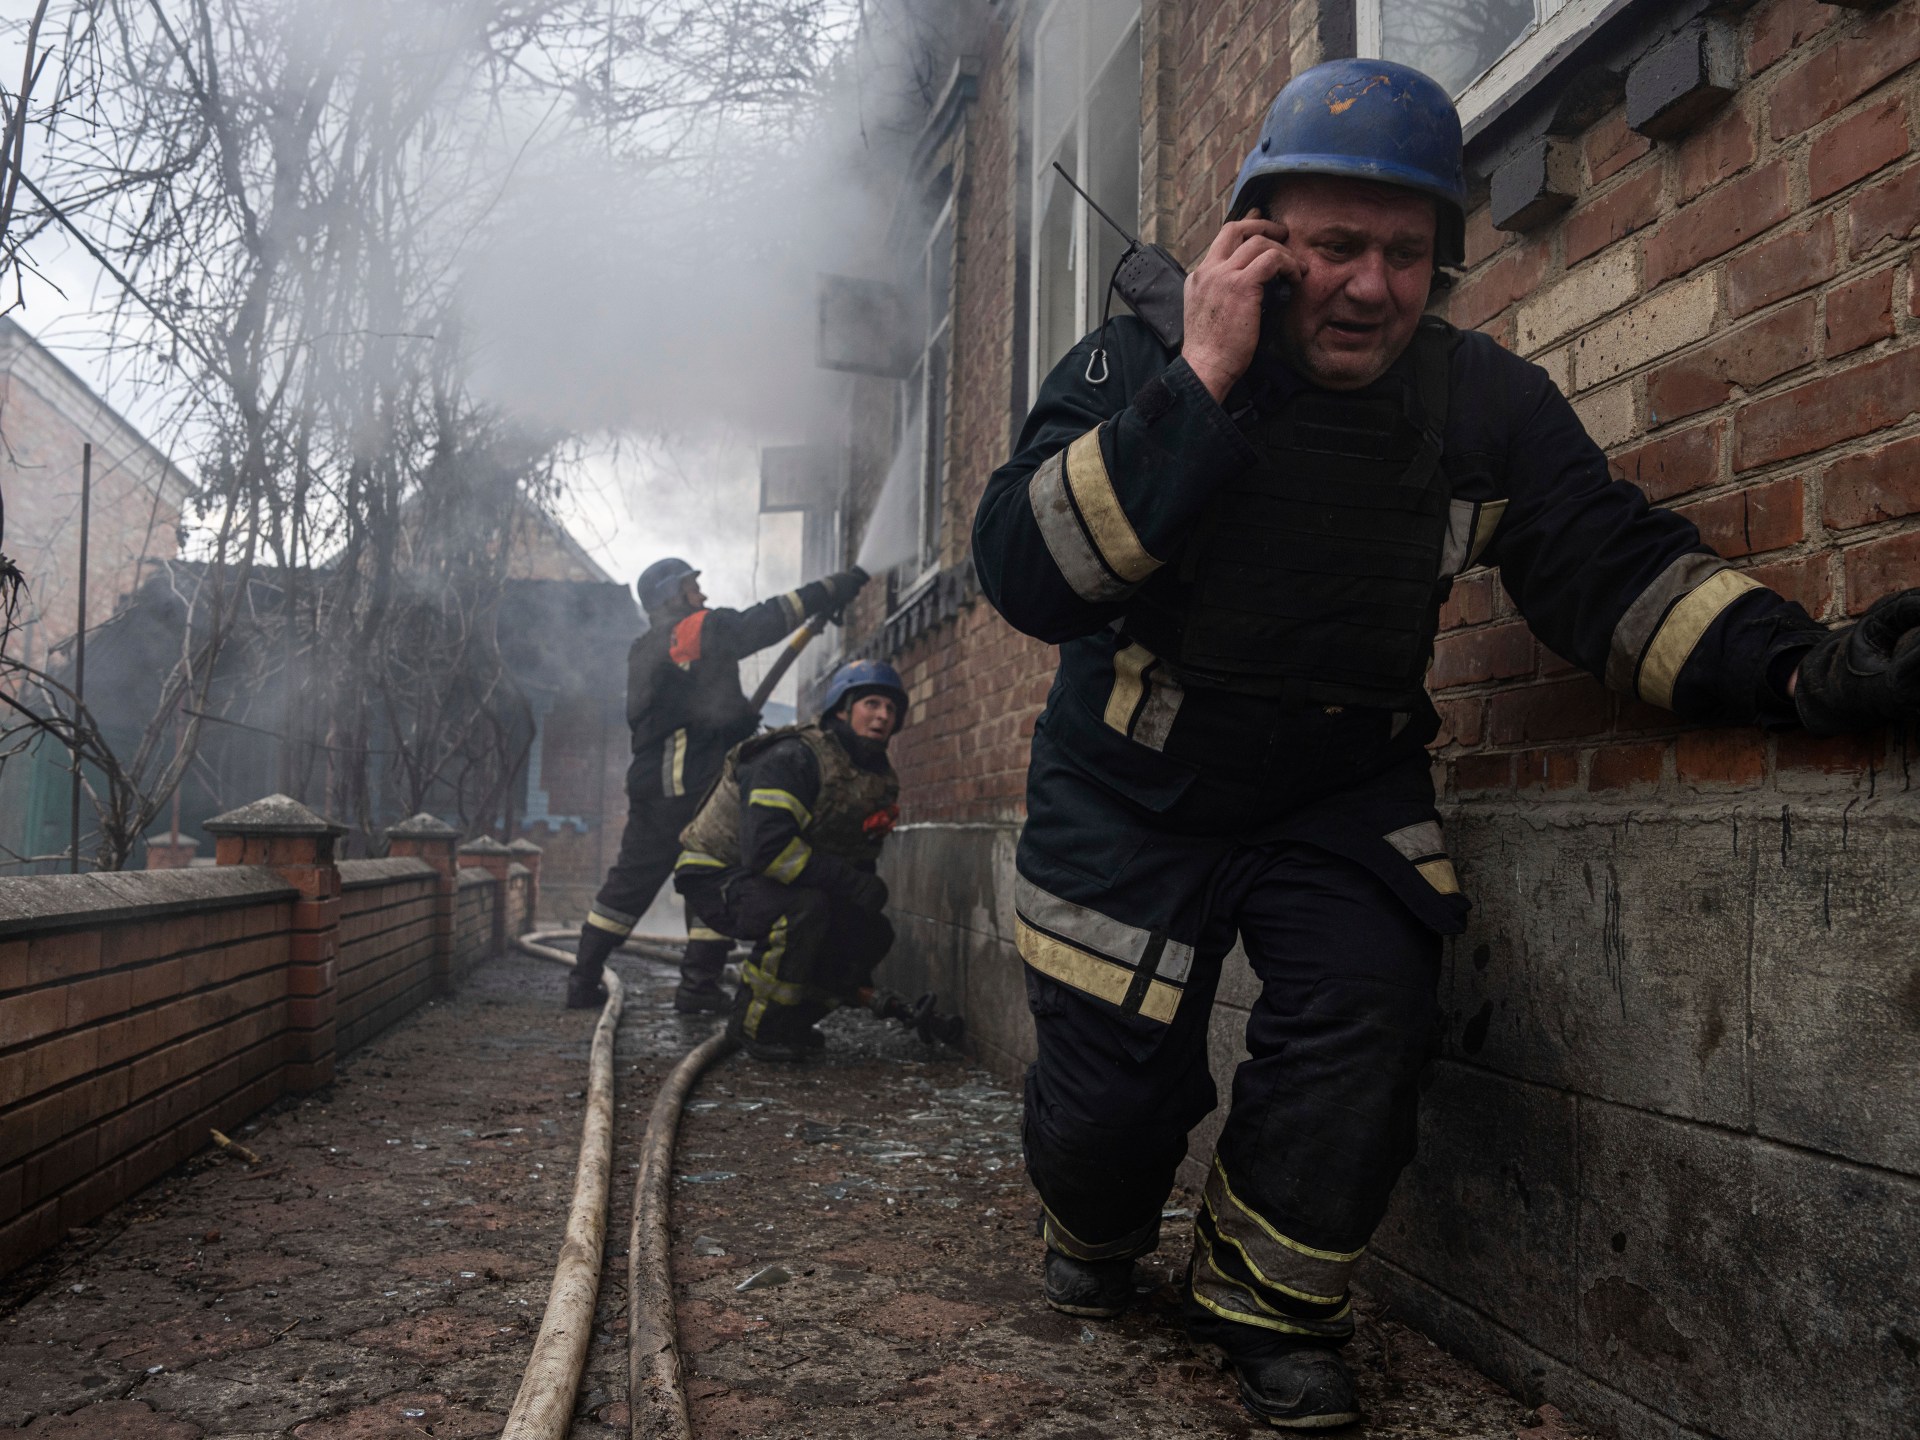 Photos: Ukrainian firefighters on risky mission to save lives